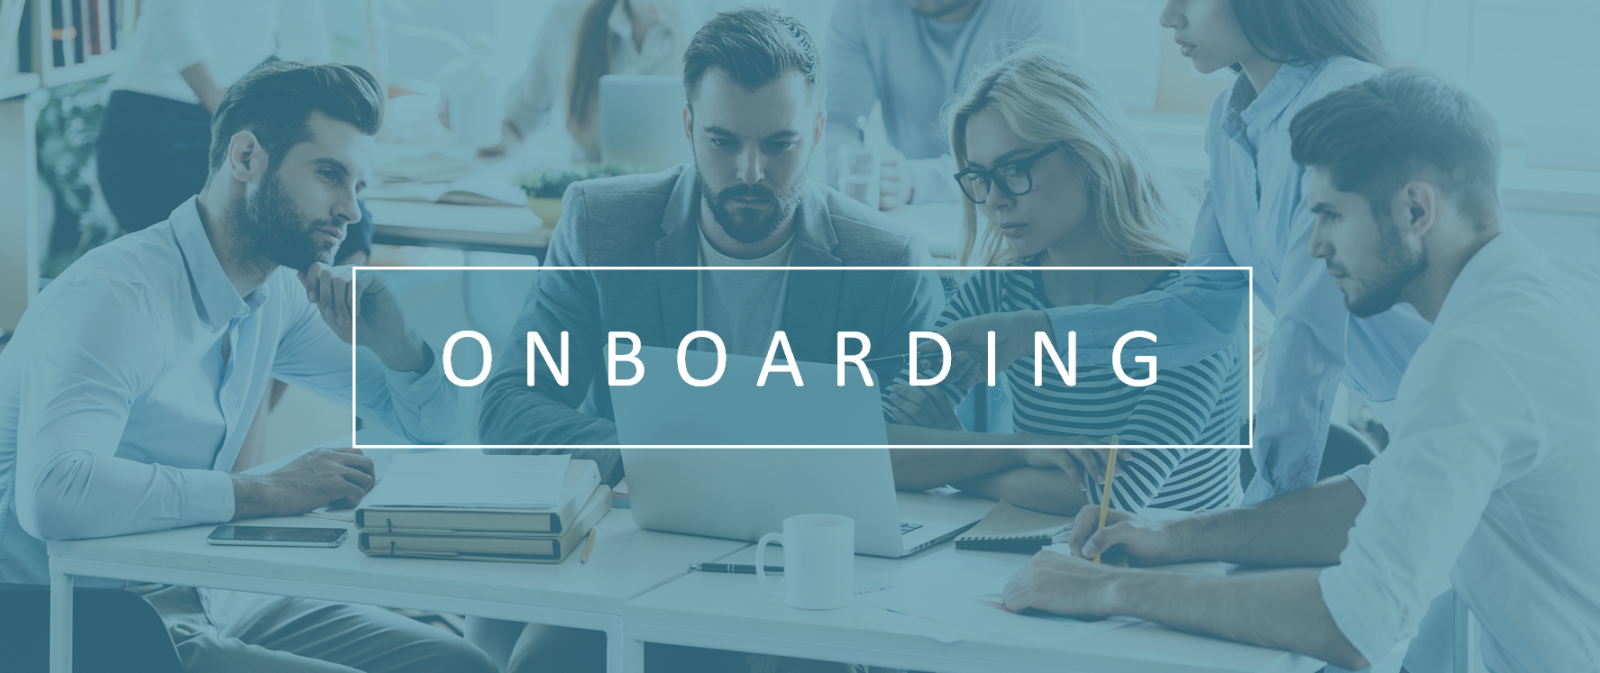 Revisit Onboarding Strategies to Strength Retention